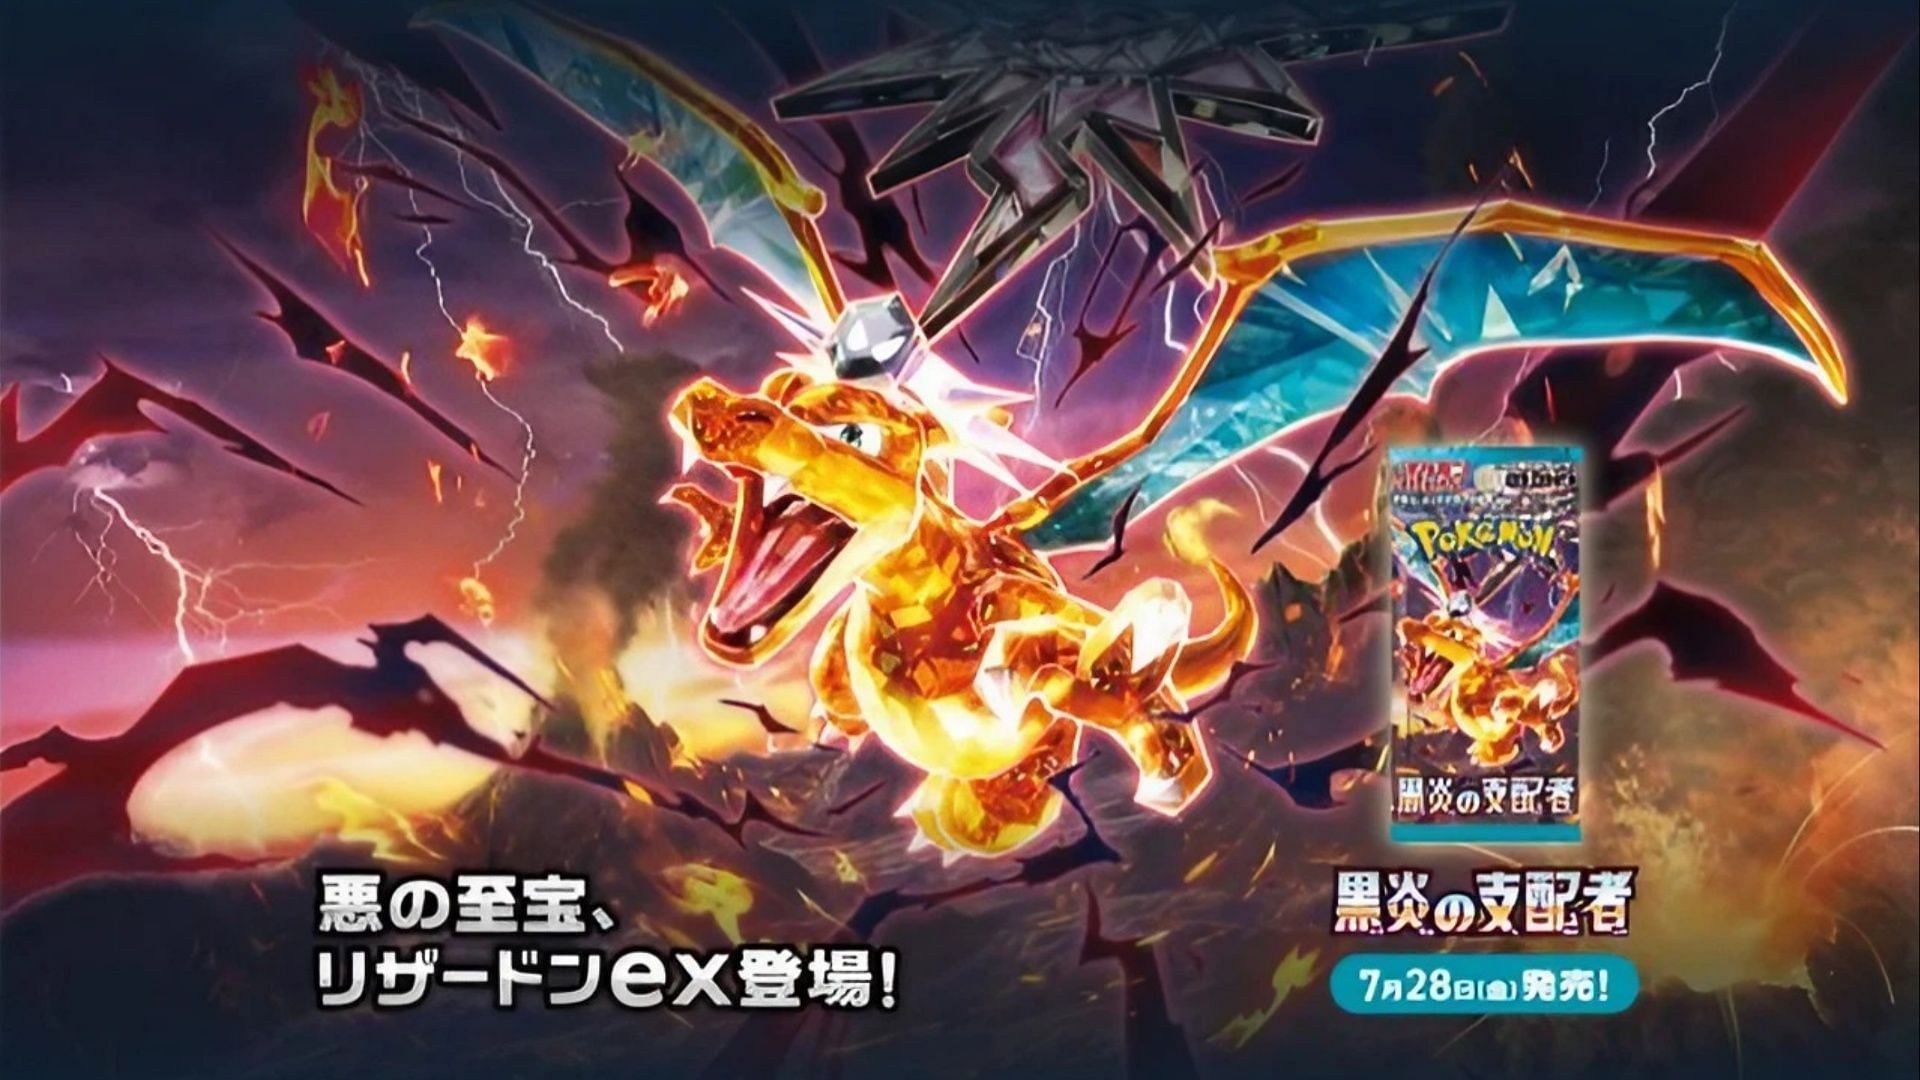 Pokemon TCG Ruler of the Black Flame: All cards revealed